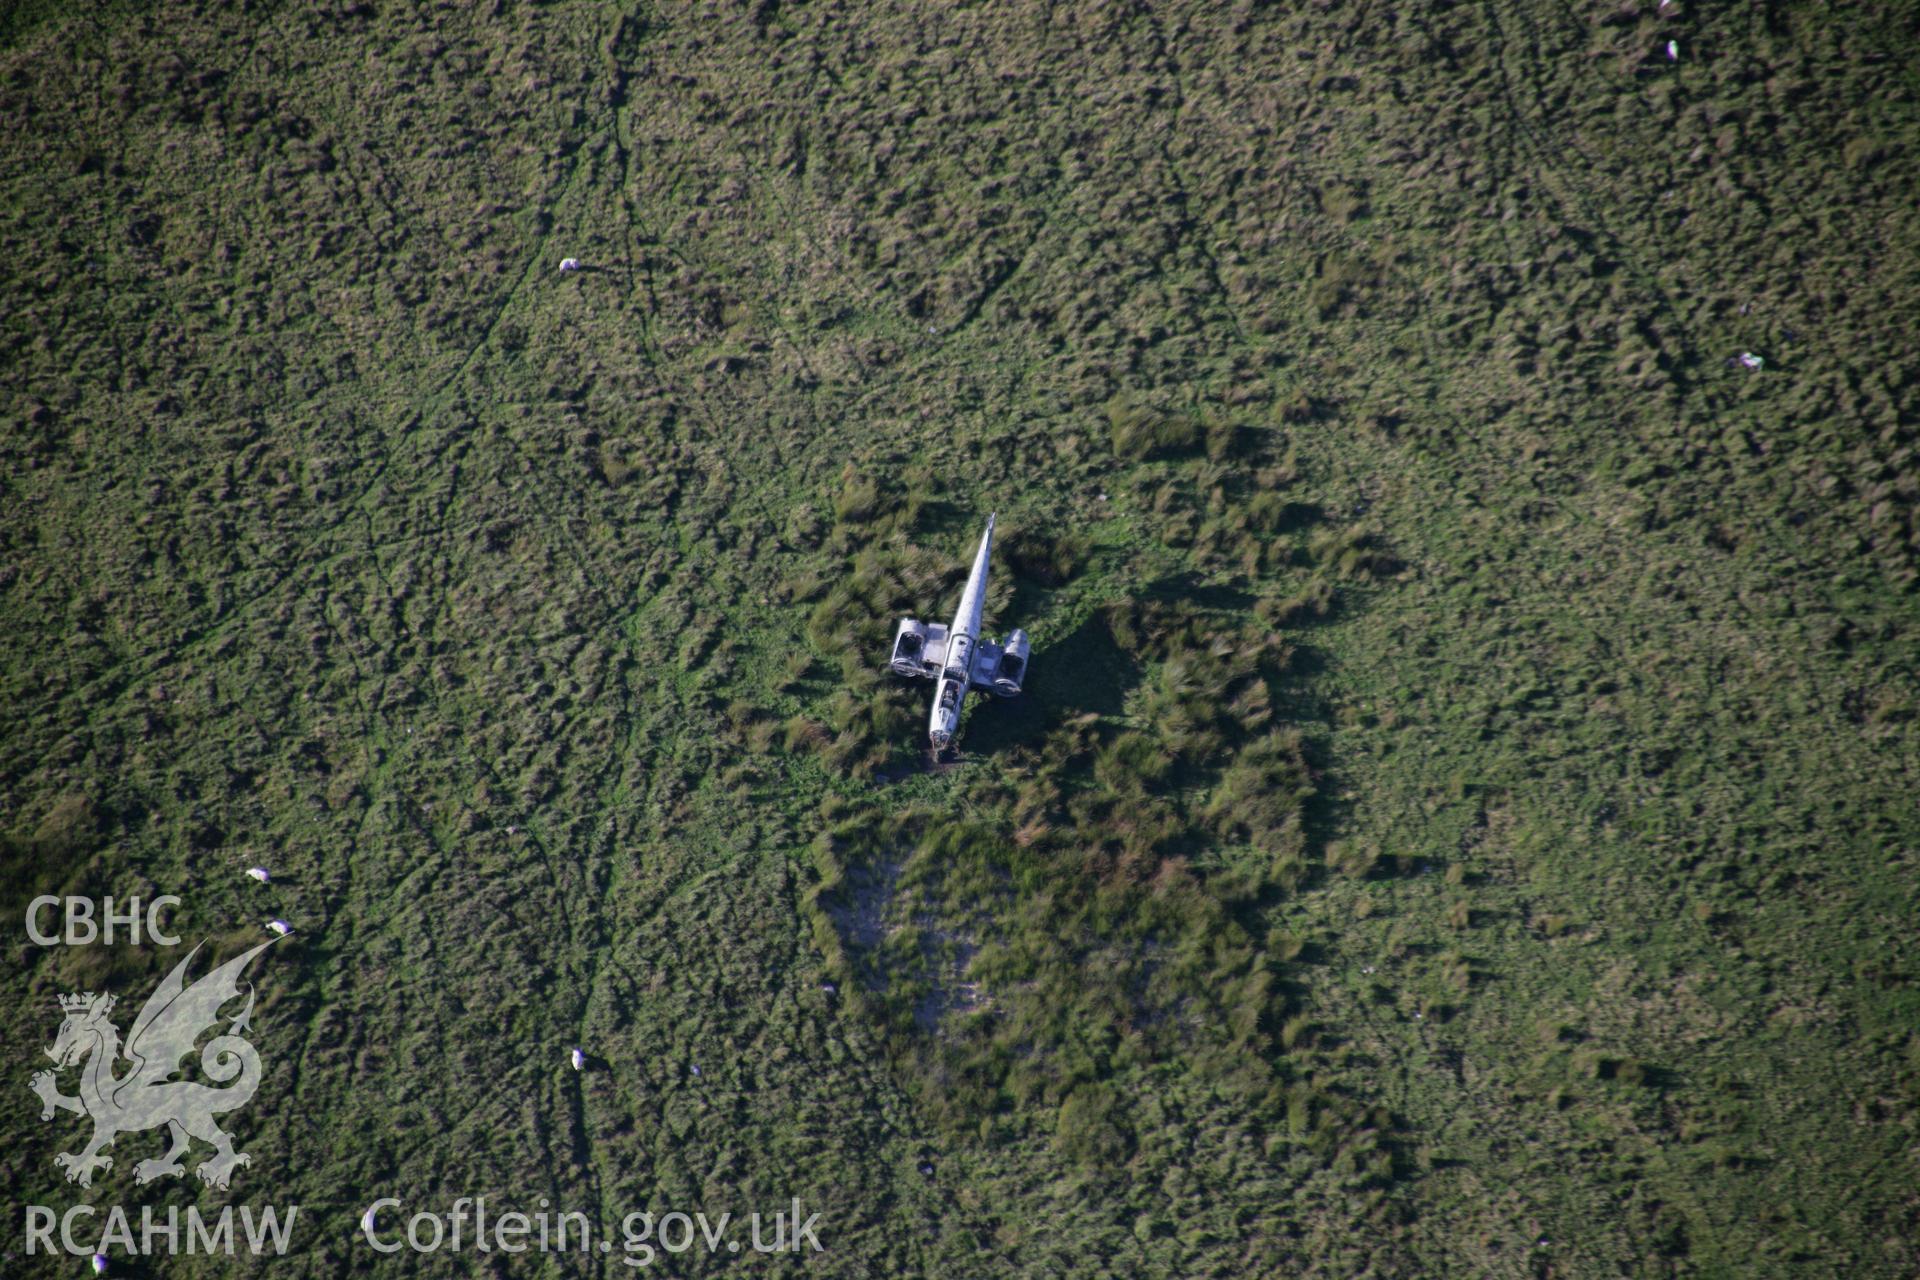 RCAHMW colour oblique aerial photograph of Sennybridge Military Training Area, Mynydd Epynt, showing a wrecked Meteor aircraft used as a target. Taken on 08 August 2007 by Toby Driver